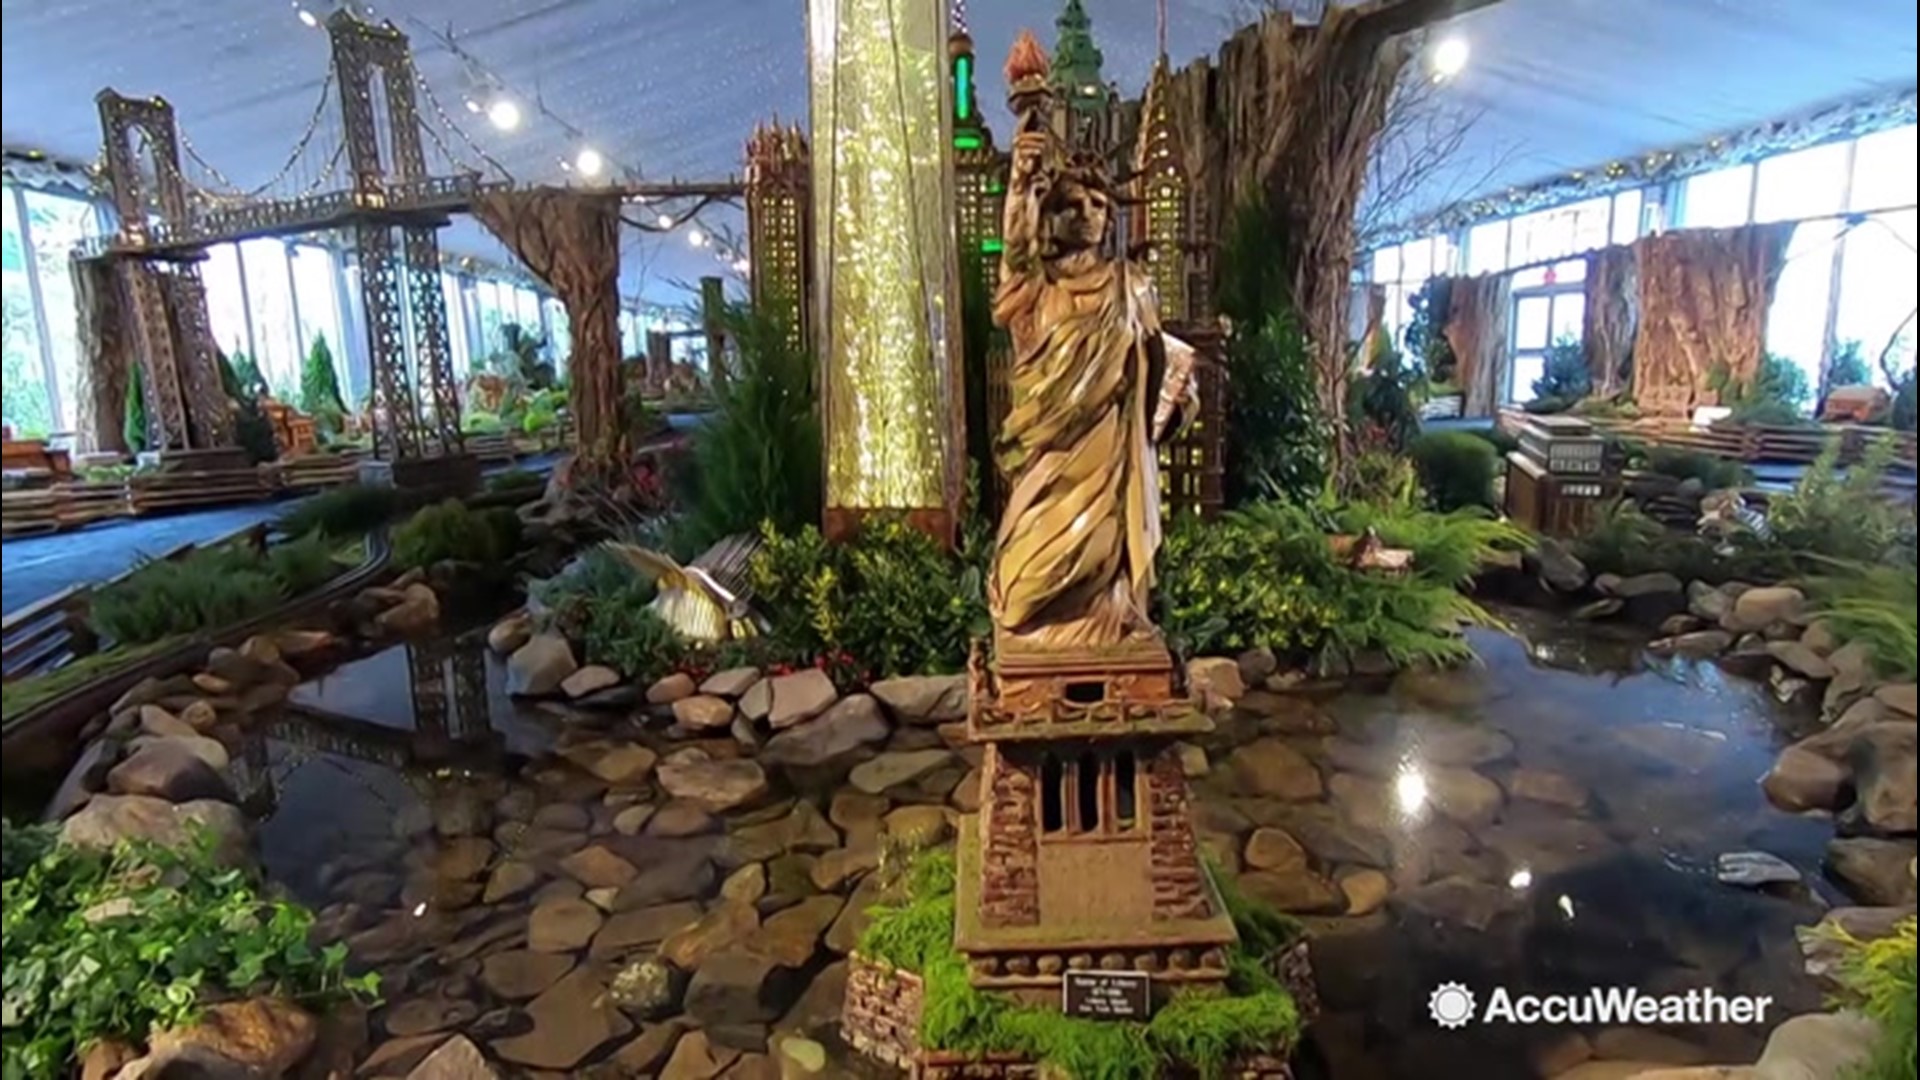 The 28th Annual Holiday Train Show at the New York Botanical Garden plans to have visitors feeling like they are outdoors for the holidays.